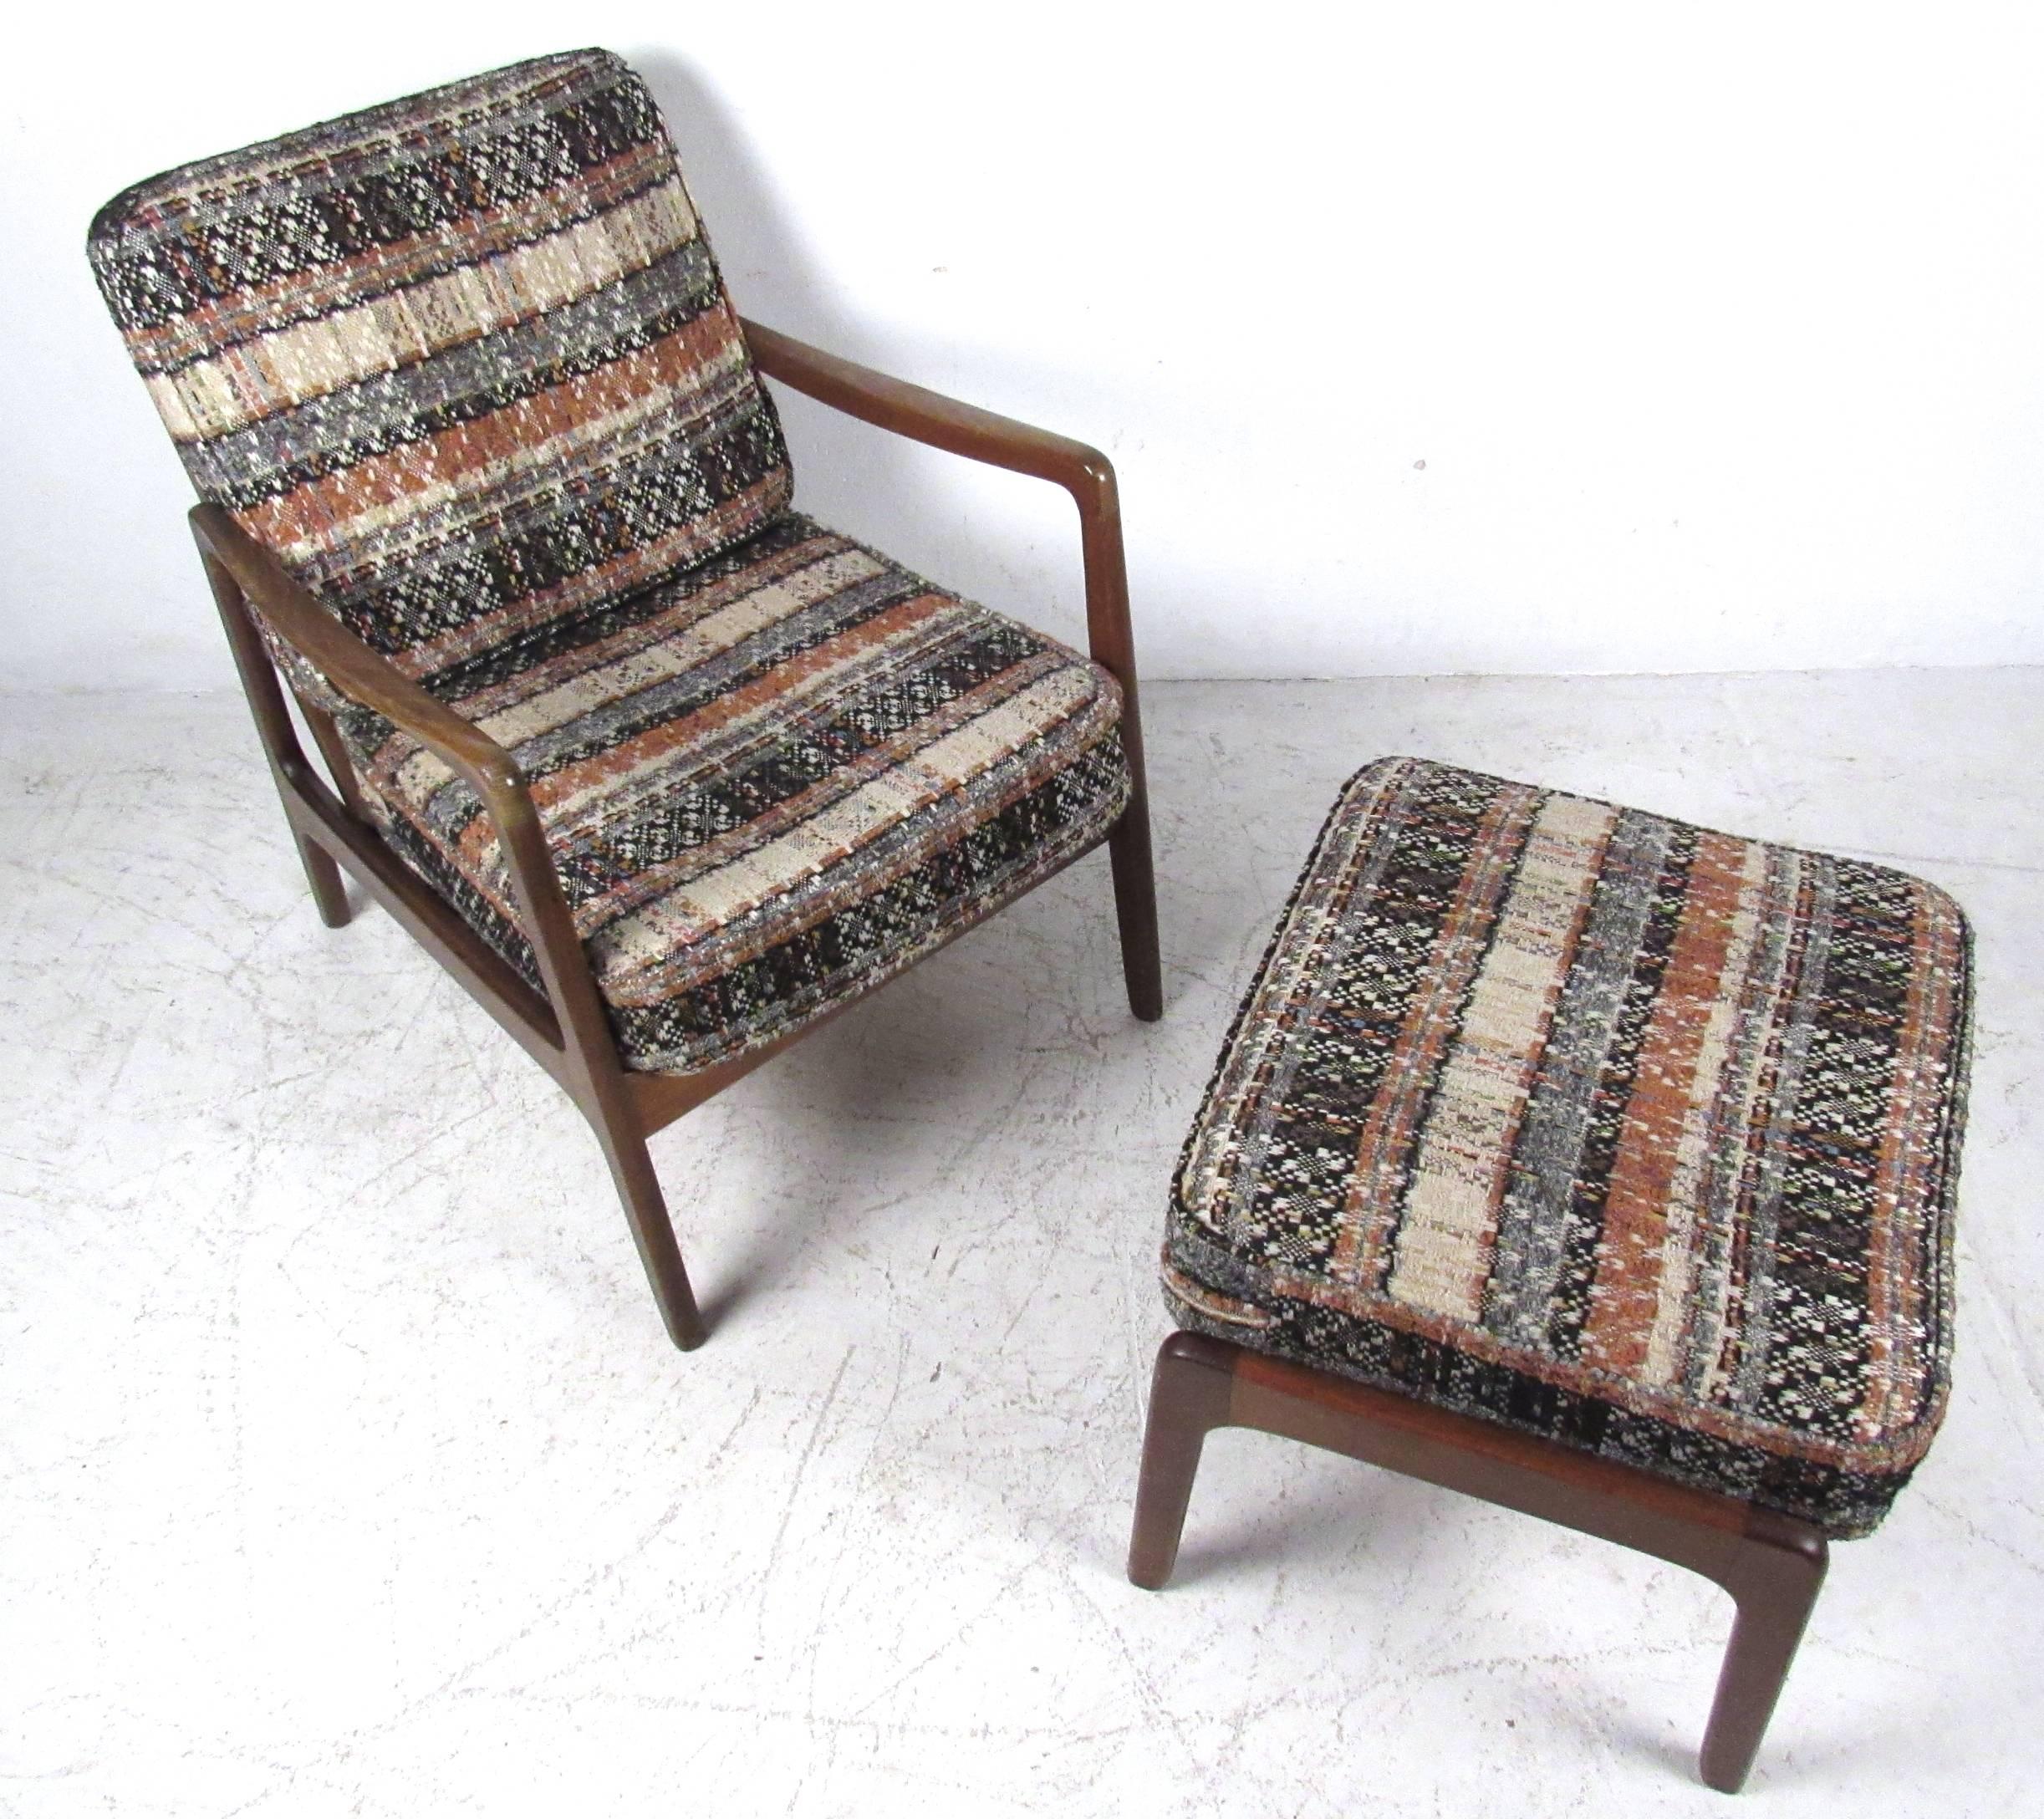 This slat back walnut lounge chair by Ole Wanscher for John Stuart comes complete with ottoman and flannel style tweed cushions. Stylish sculpted armrests accent it's comfortable design, adding to this Mid-Century marriage of style and usability.